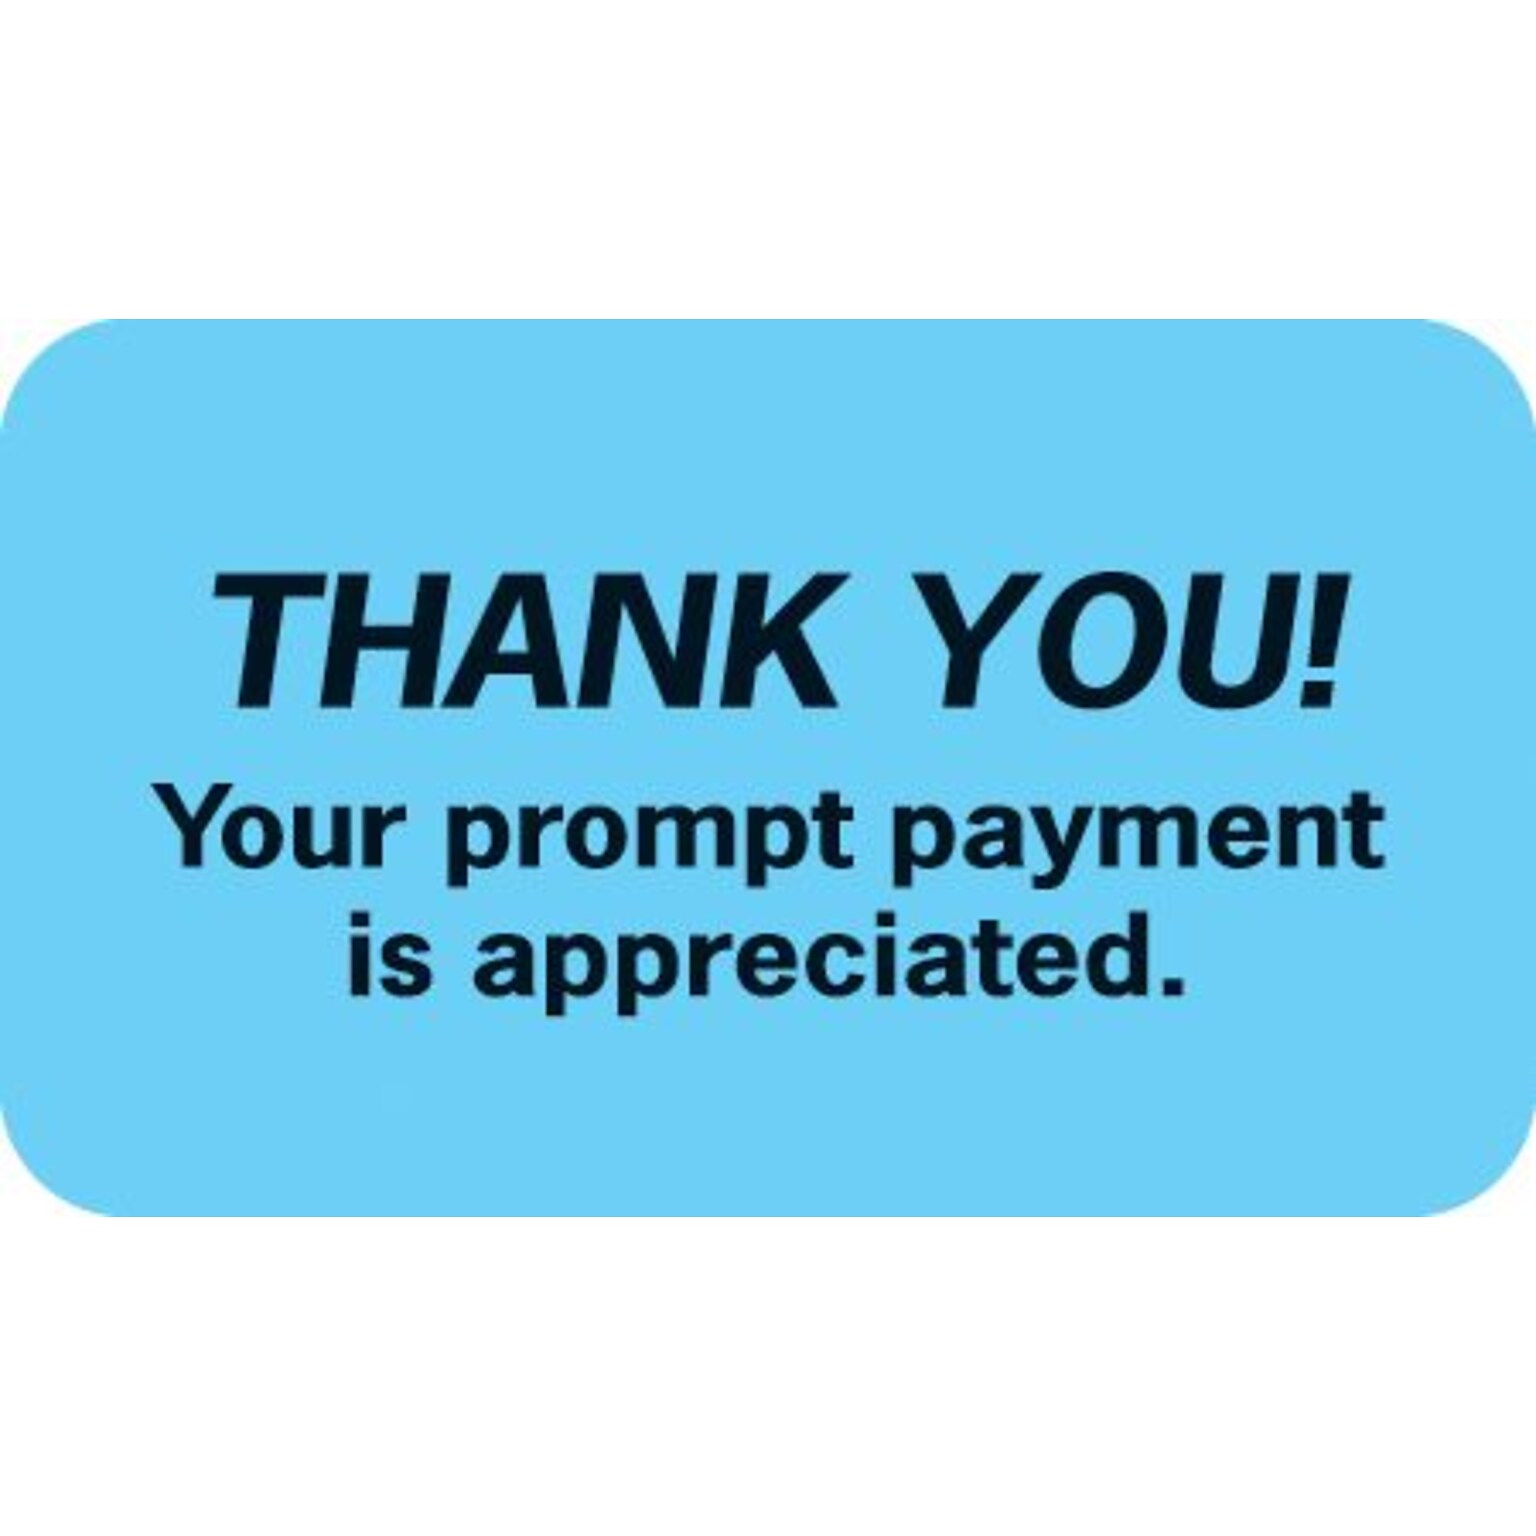 Medical Arts Press® Reminder & Thank You Collection Labels, Thank You!, Light Blue, 7/8x1-1/2, 500 Labels